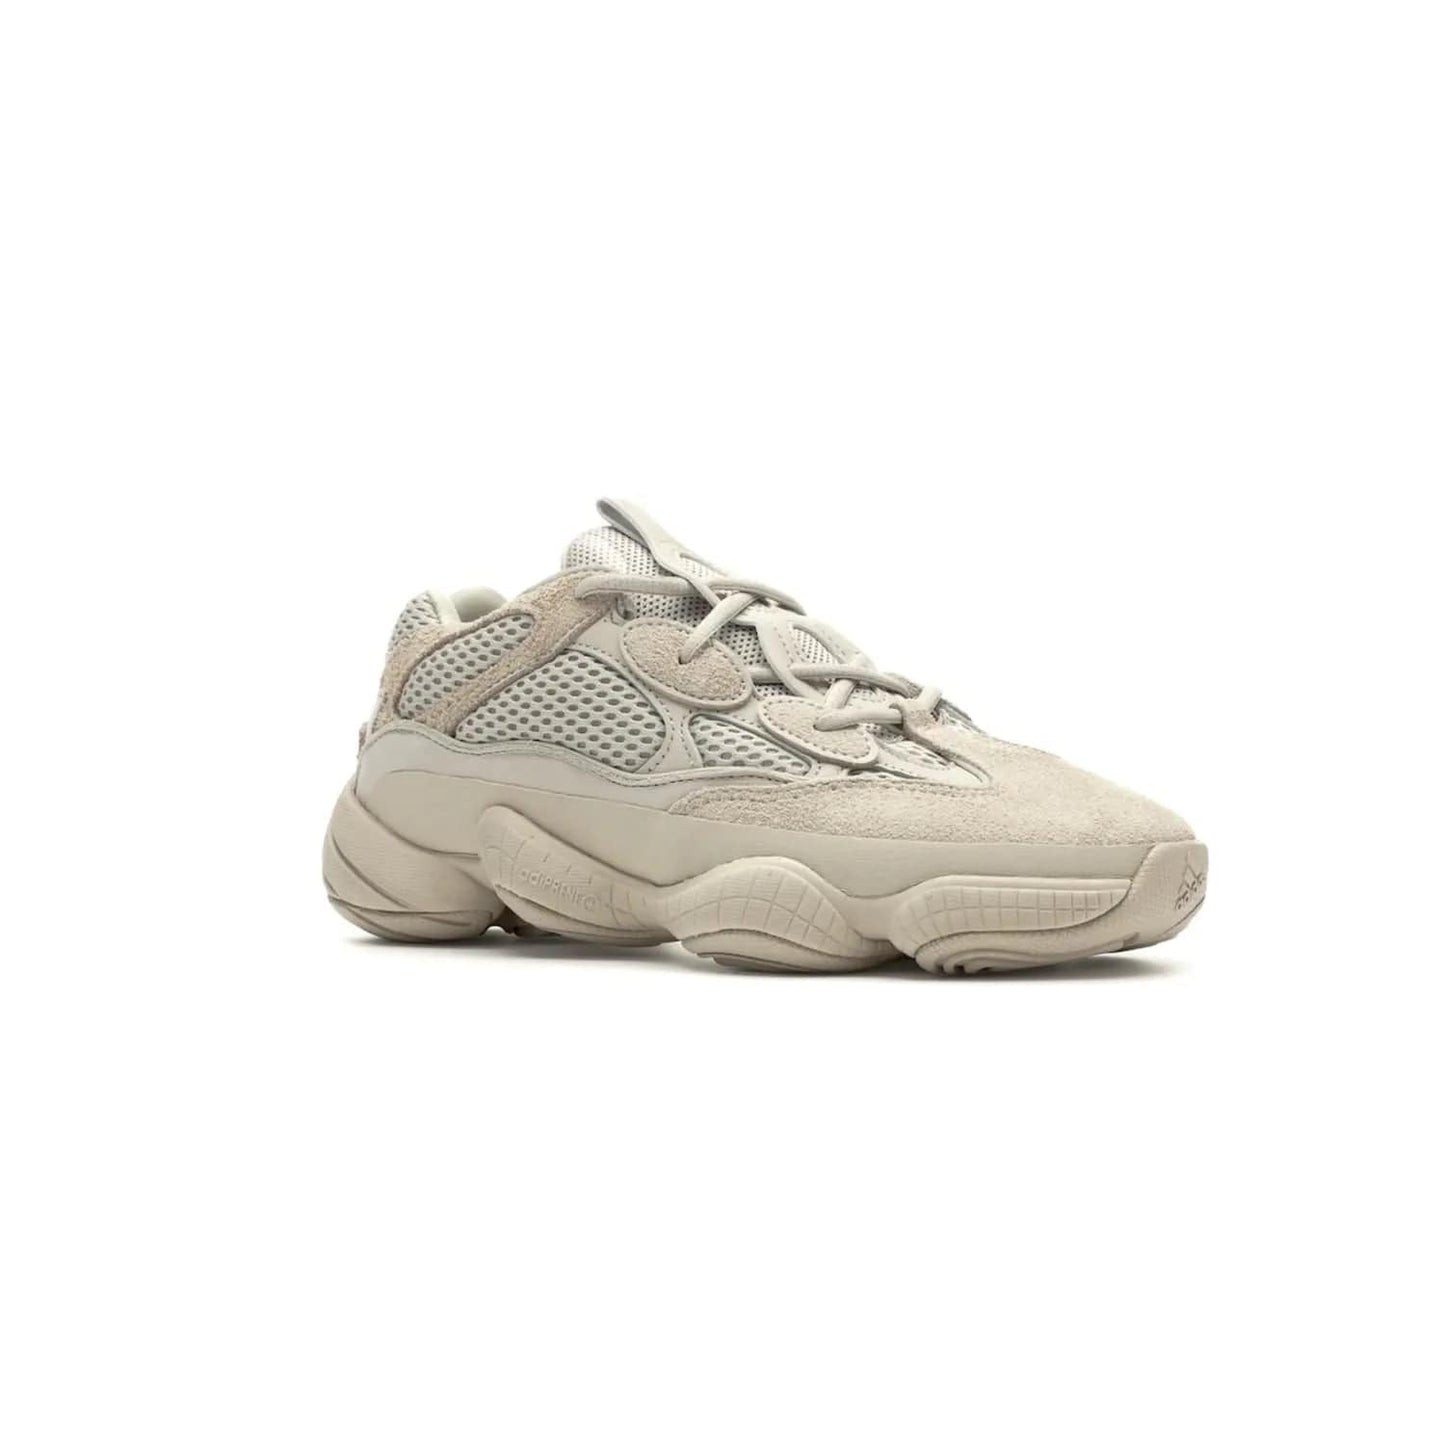 adidas Yeezy 500 Blush - Image 4 - Only at www.BallersClubKickz.com - Step up your sneaker game with the Adidas Yeezy 500 Blush. Monochromatic pale pink palette, hiking-inspired suede/mesh construction, plus adiPRENE sole for comfort and performance. Get the Adidas Yeezy 500 and experience true style and comfort.